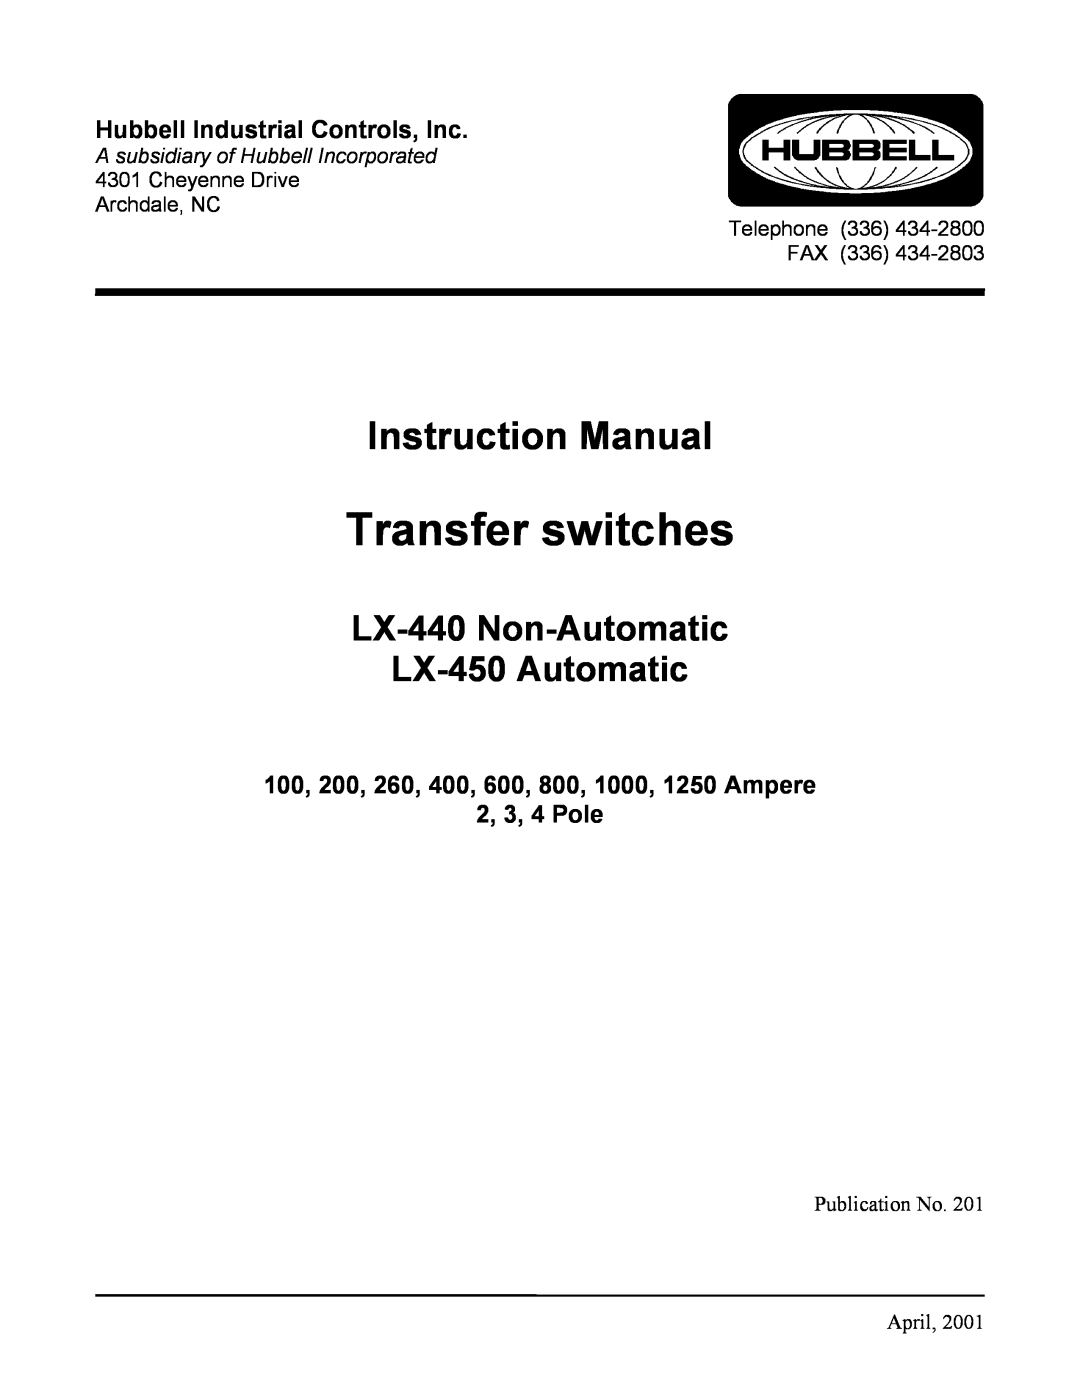 Hubbell LX-450, LX-440 instruction manual Hubbell Industrial Controls, Inc, Telephone 336 FAX, Transfer switches 